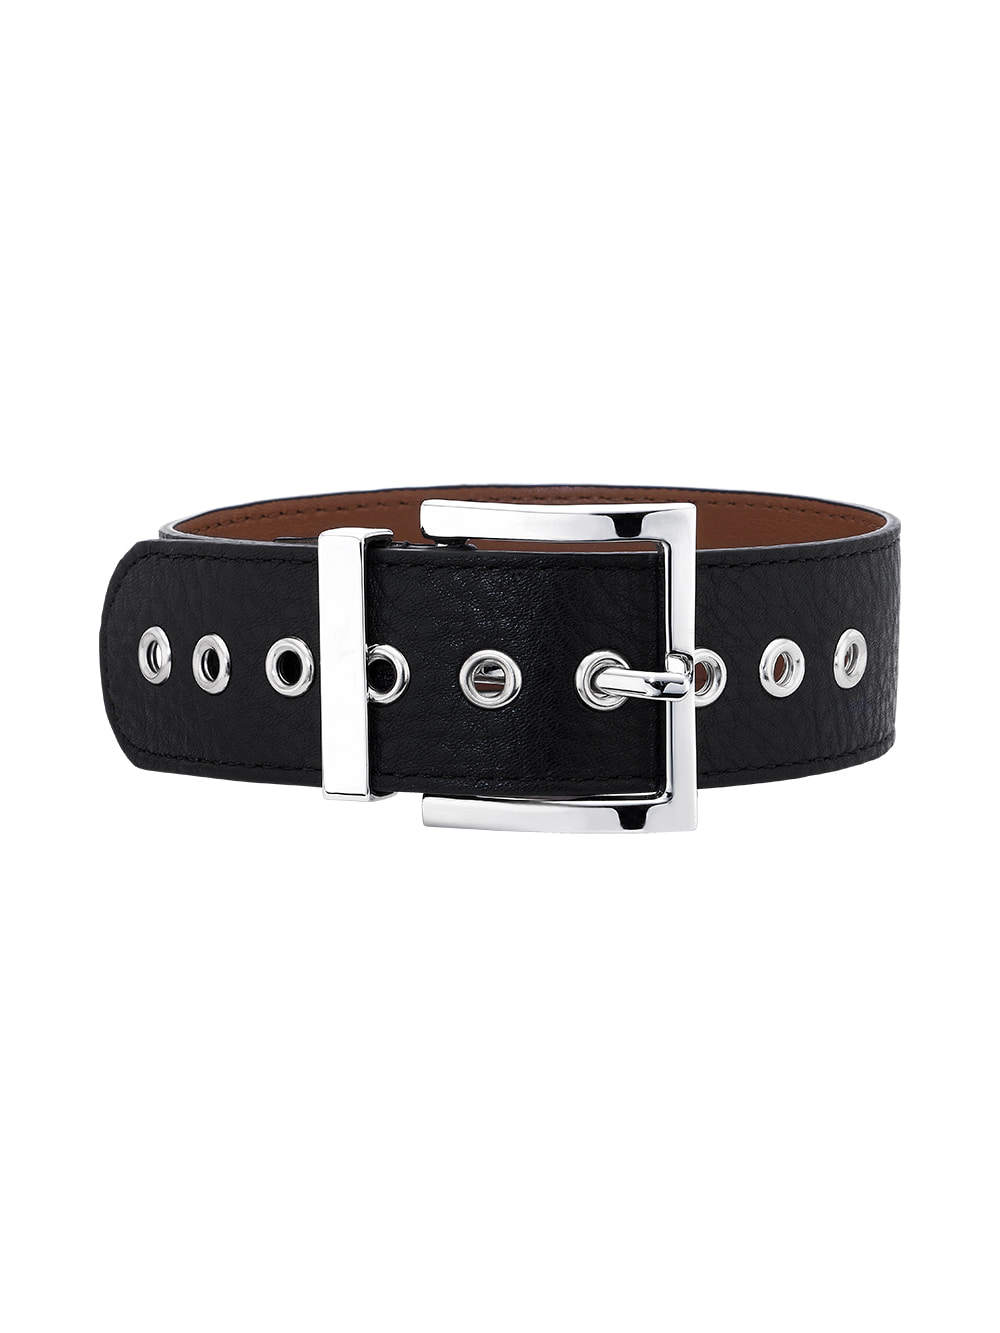 LARGE BUCKLE UP LEATHER CHOKER